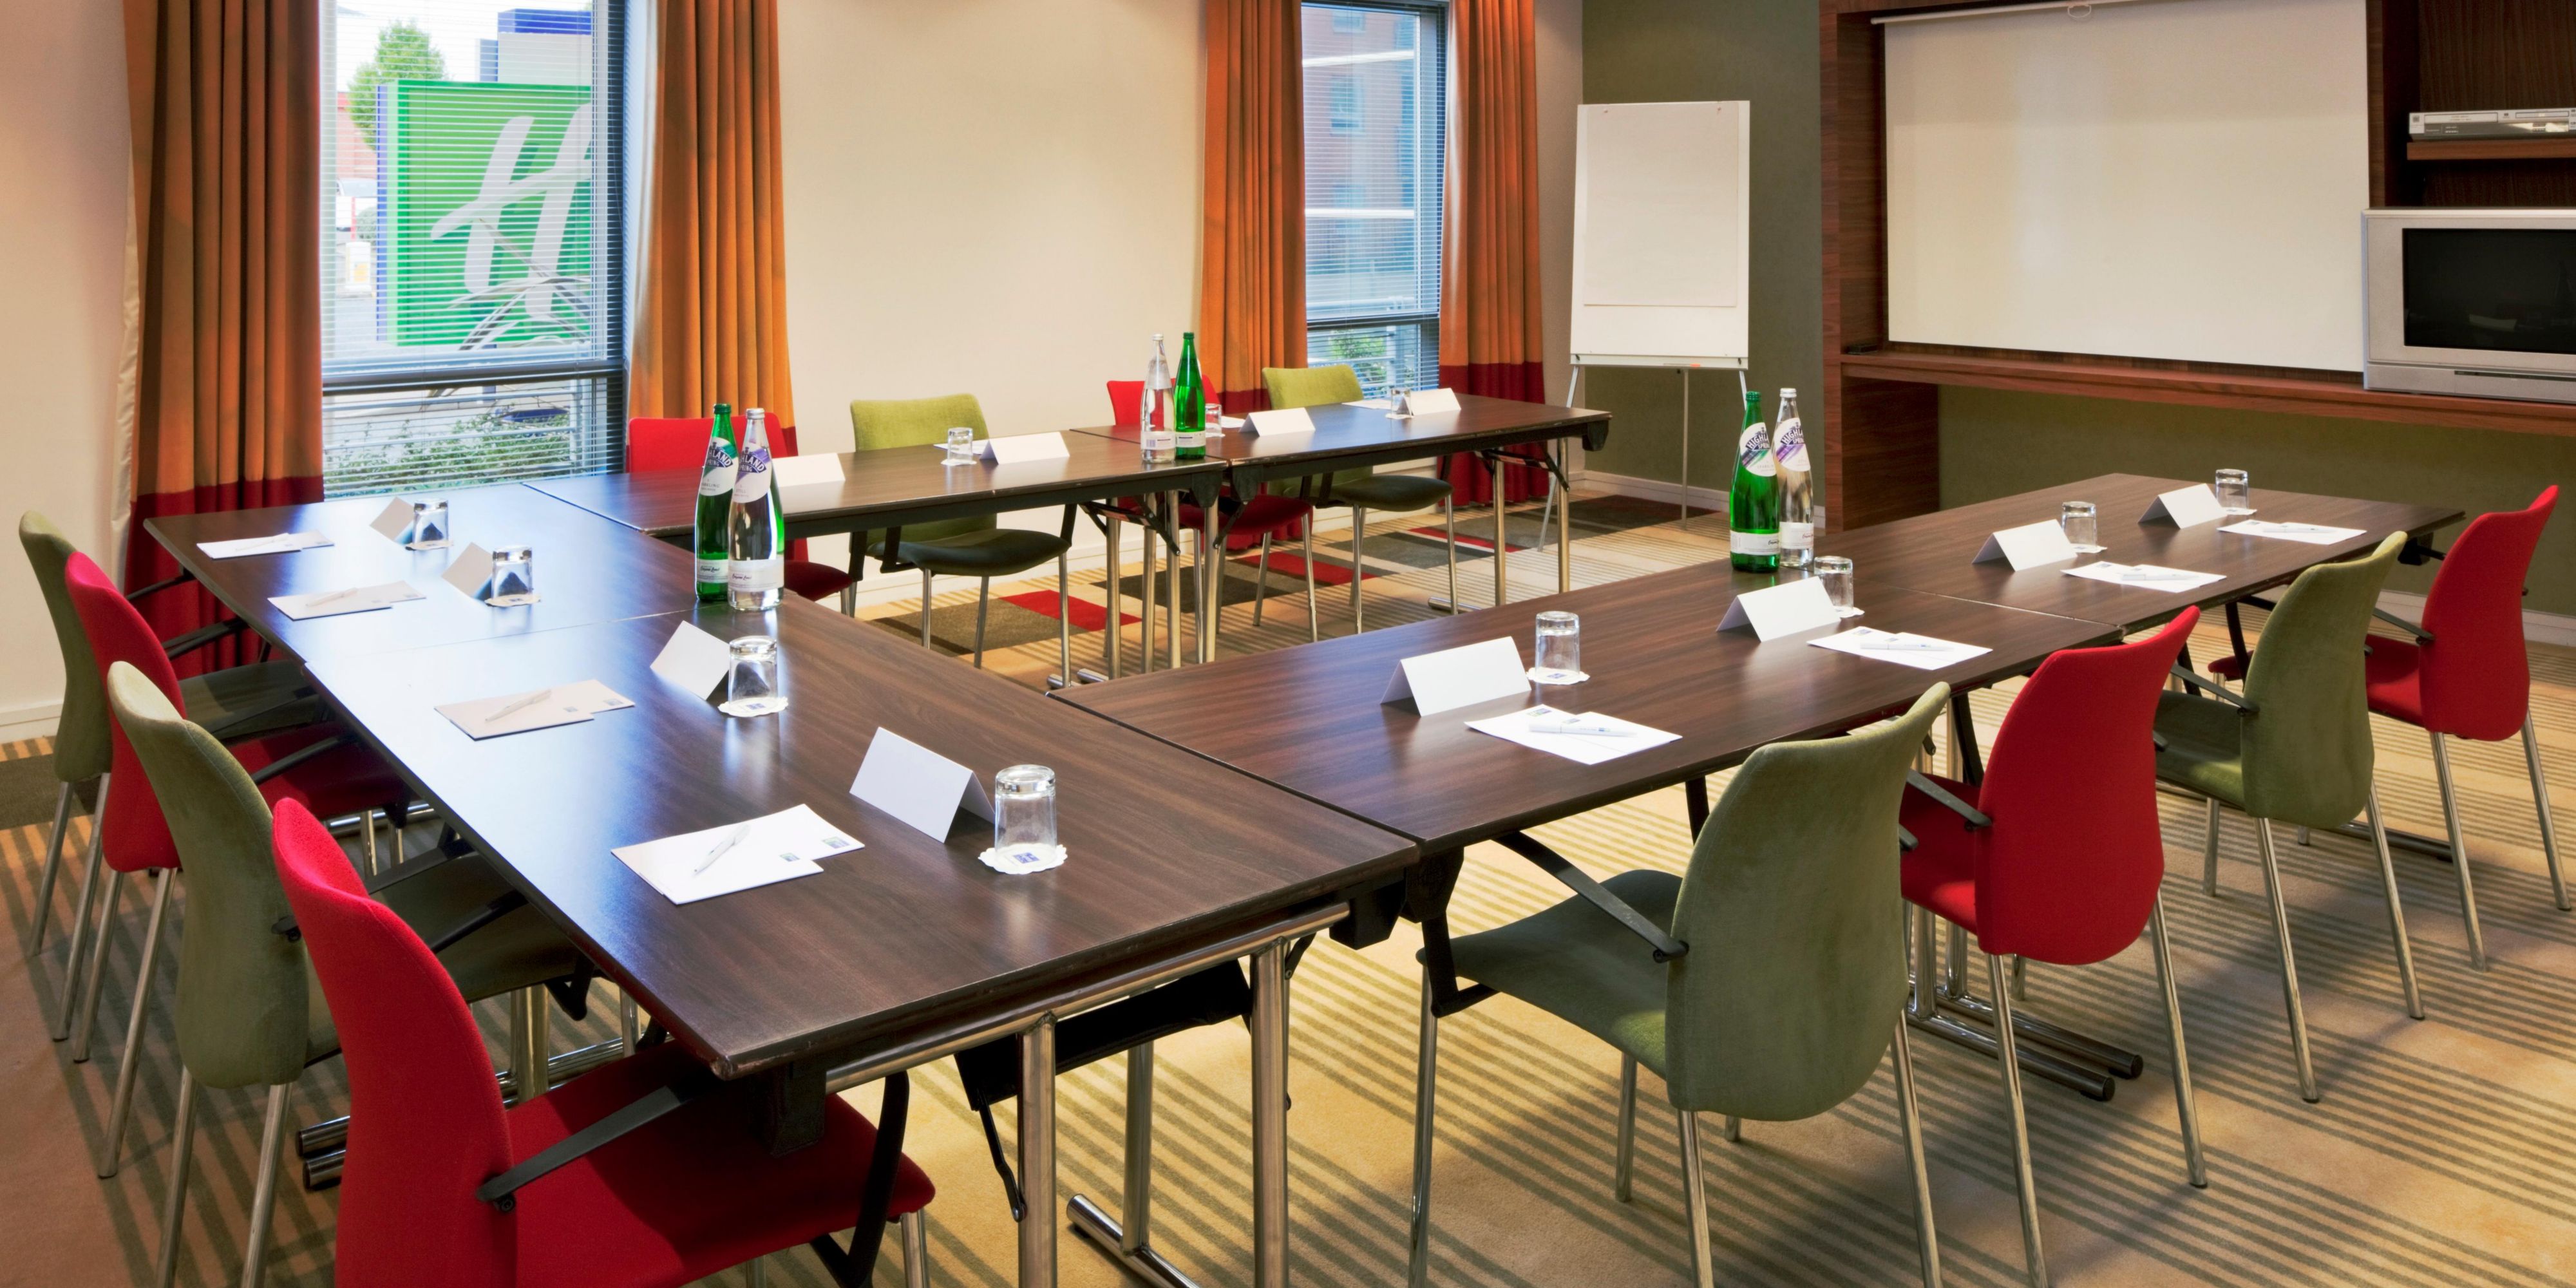 Host interviews, training days and conferences for up to 30 people in one of the meeting rooms. There's free Wi-Fi and parking plus catering can also be arranged. Unlimited tea and coffee included.